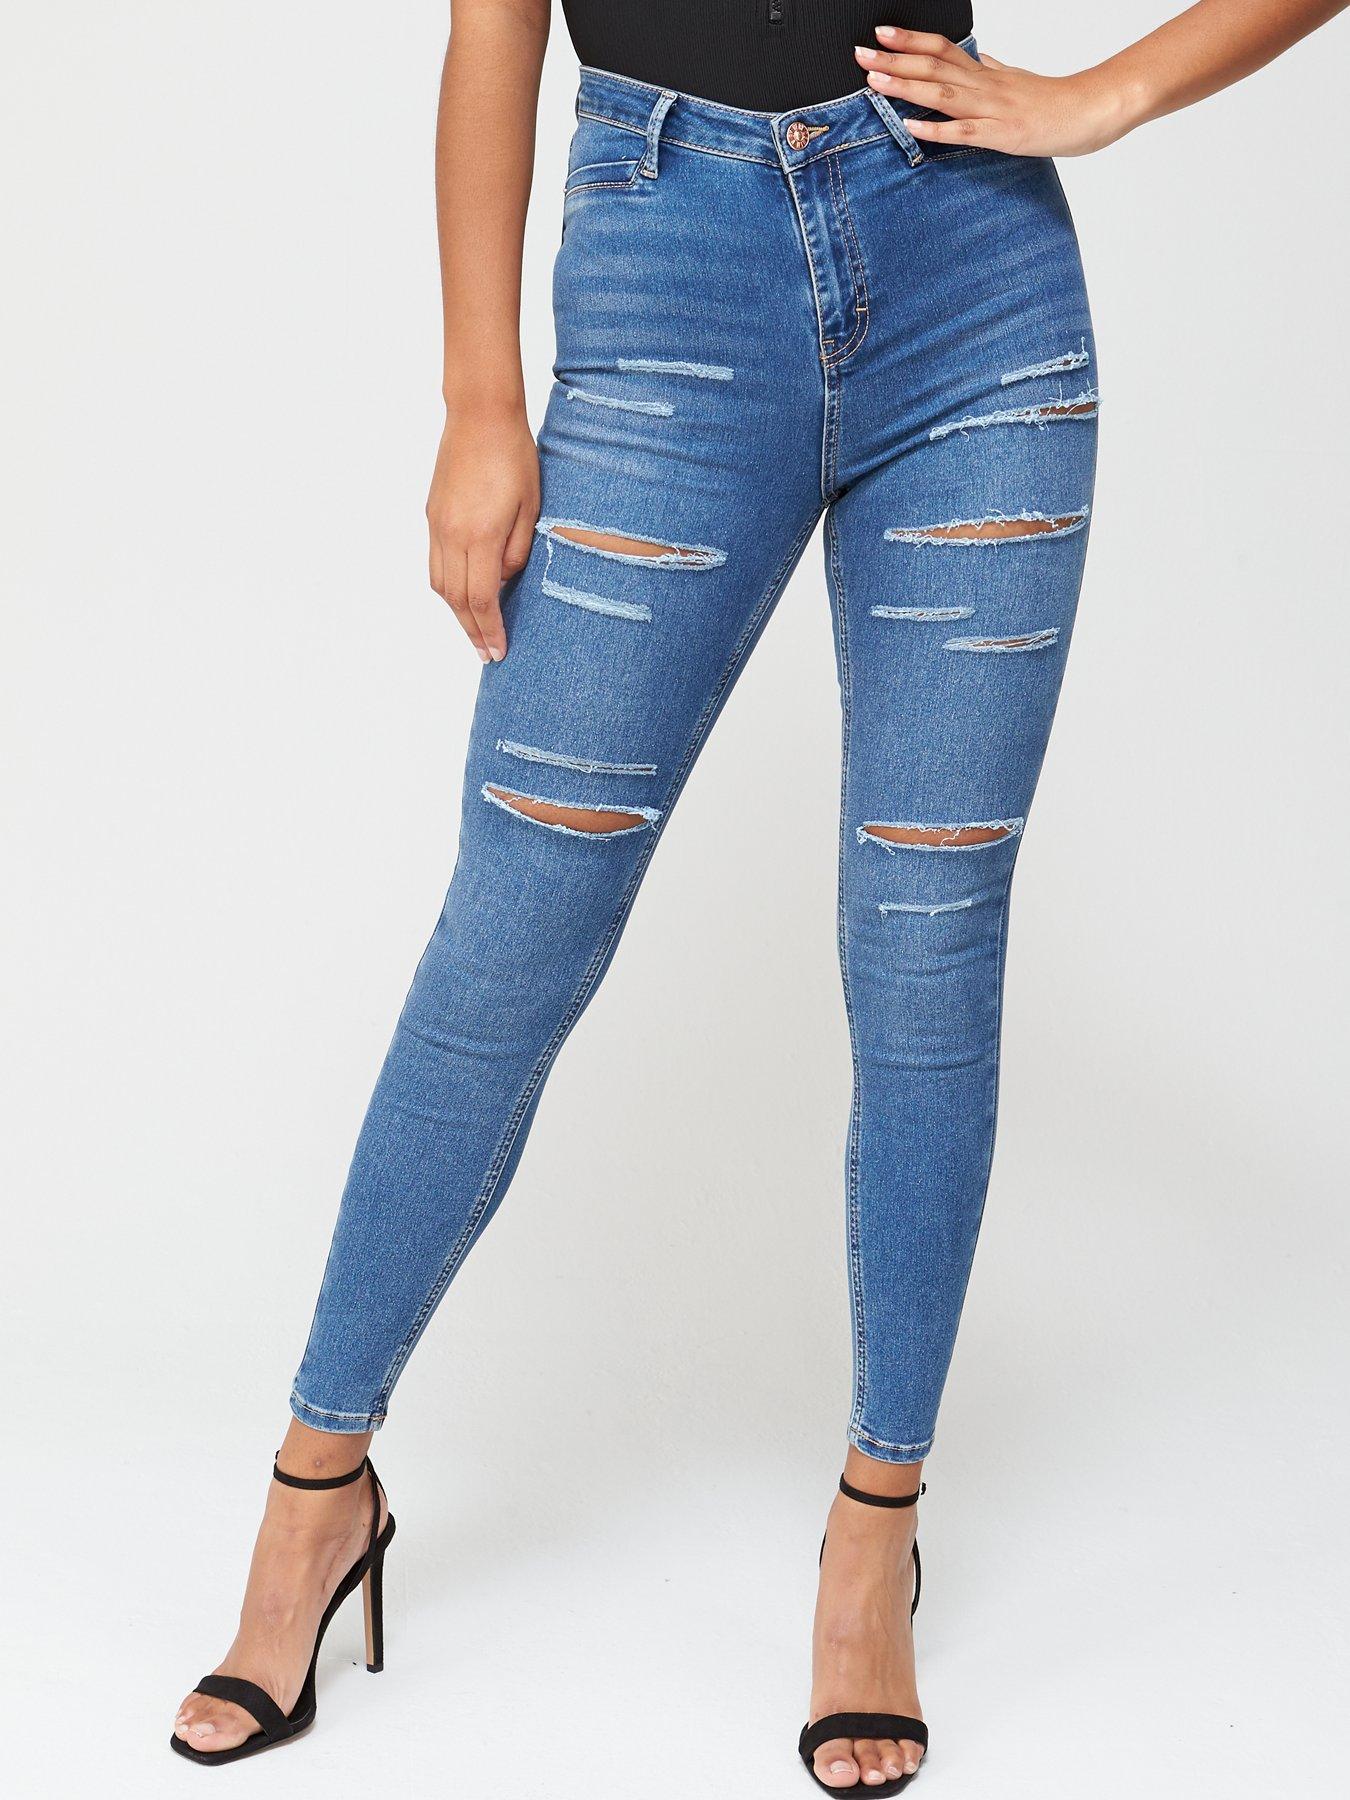 womens ripped skinny jeans uk